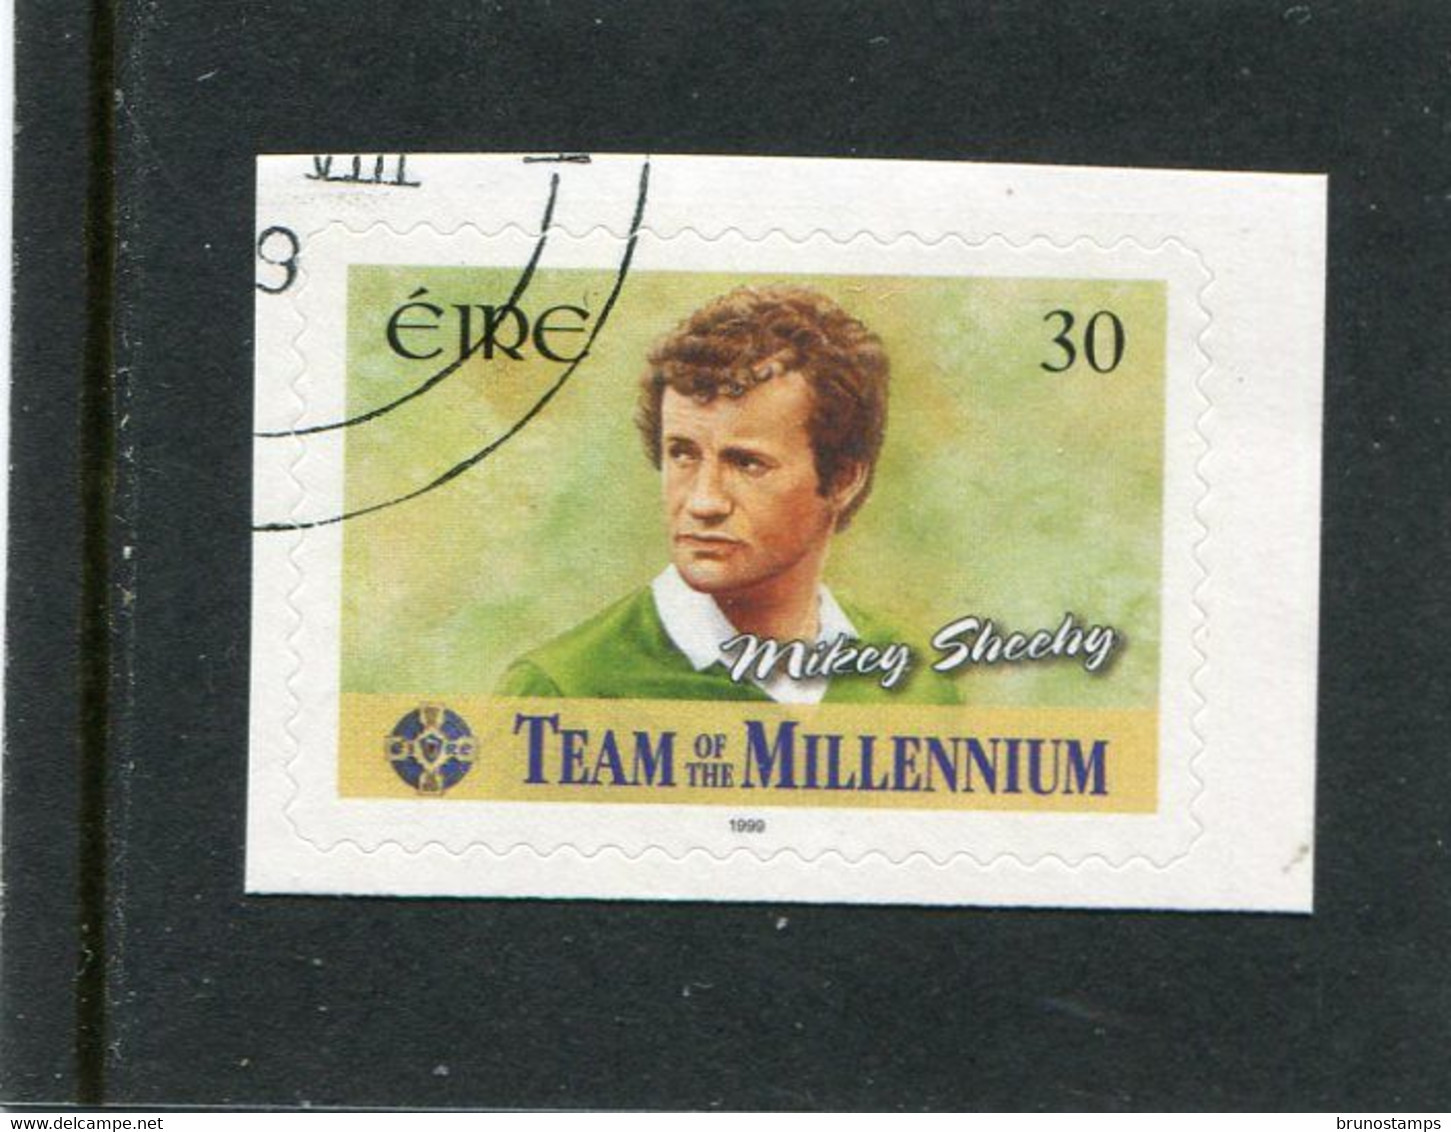 IRELAND/EIRE - 1999  30p  MIKEY SHEEHY  SELF ADHESIVE  FINE USED - Used Stamps